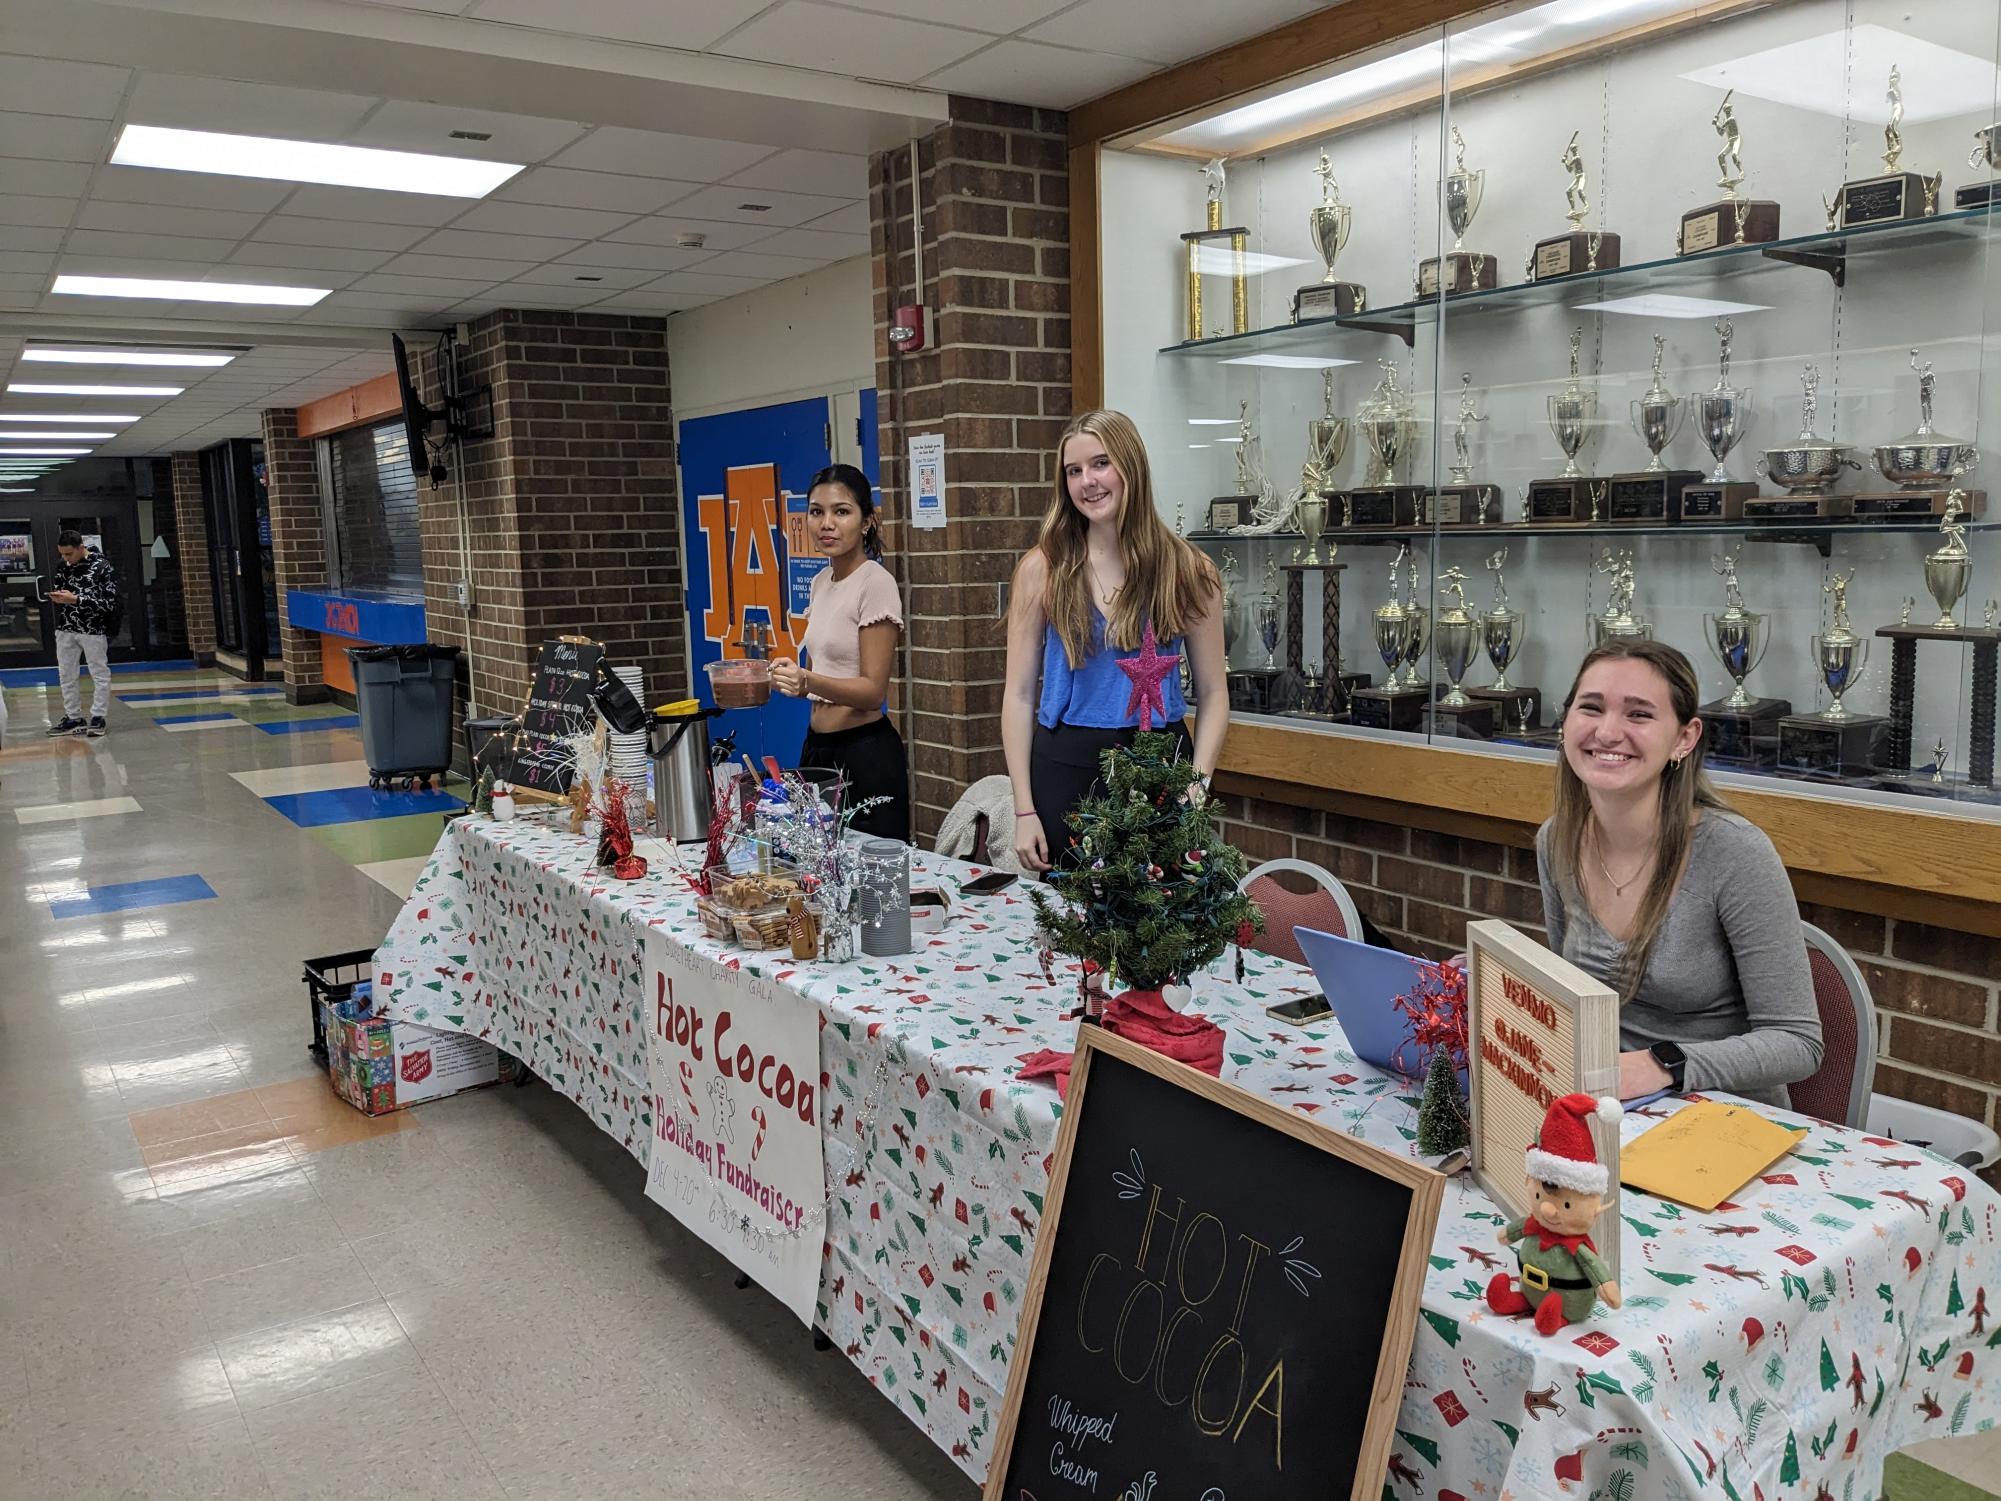 Hot chocolate stand ready to get the staff and students ready for the day while raising money.